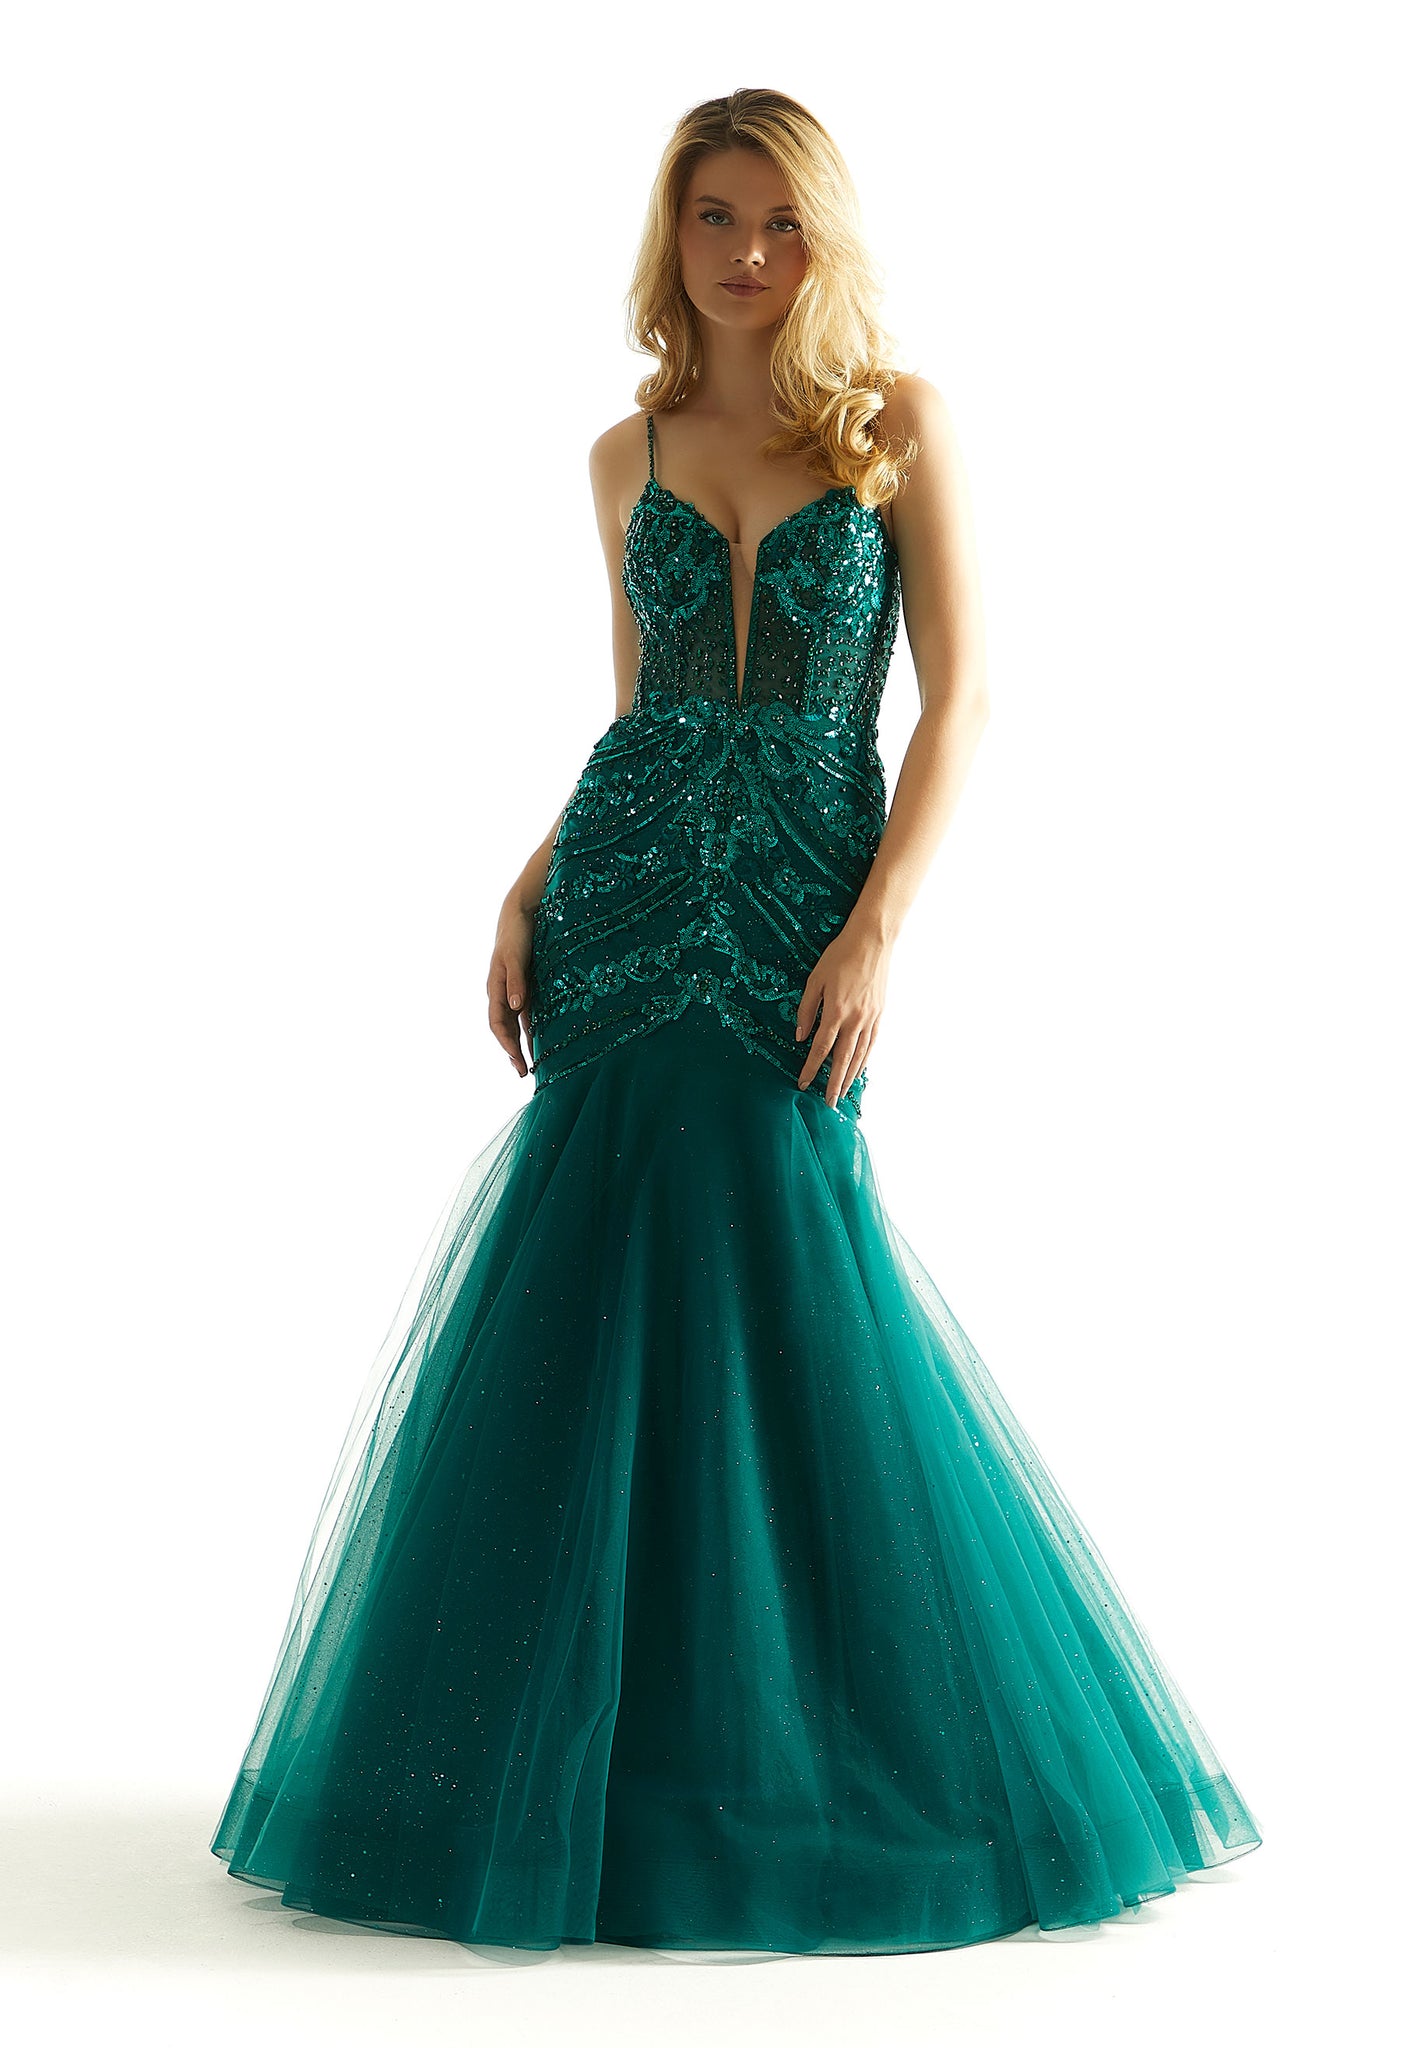 Feel classy and elegant in this magnificent long dress by Morilee, style 49014. Showcasing a mermaid silhouette with plunging v neckline that has mesh for q modest touch. This ensemble is adorned with glistening sequins and dazzling beadwork. The corset bodice is sure to hug your body gorgeously. The tulle skirt has glitter for a touch of sparkle.